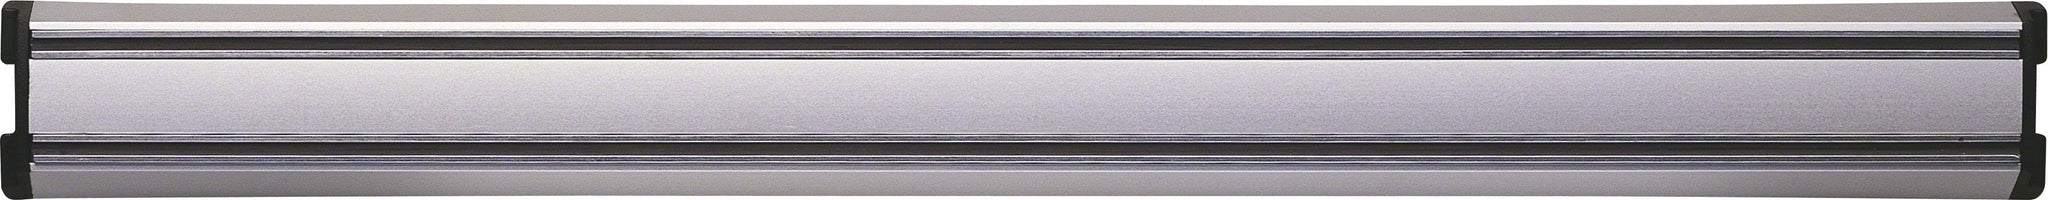 Zwilling - 17.5" Silver Aluminum Magnetic Knife Bar - 32622-450